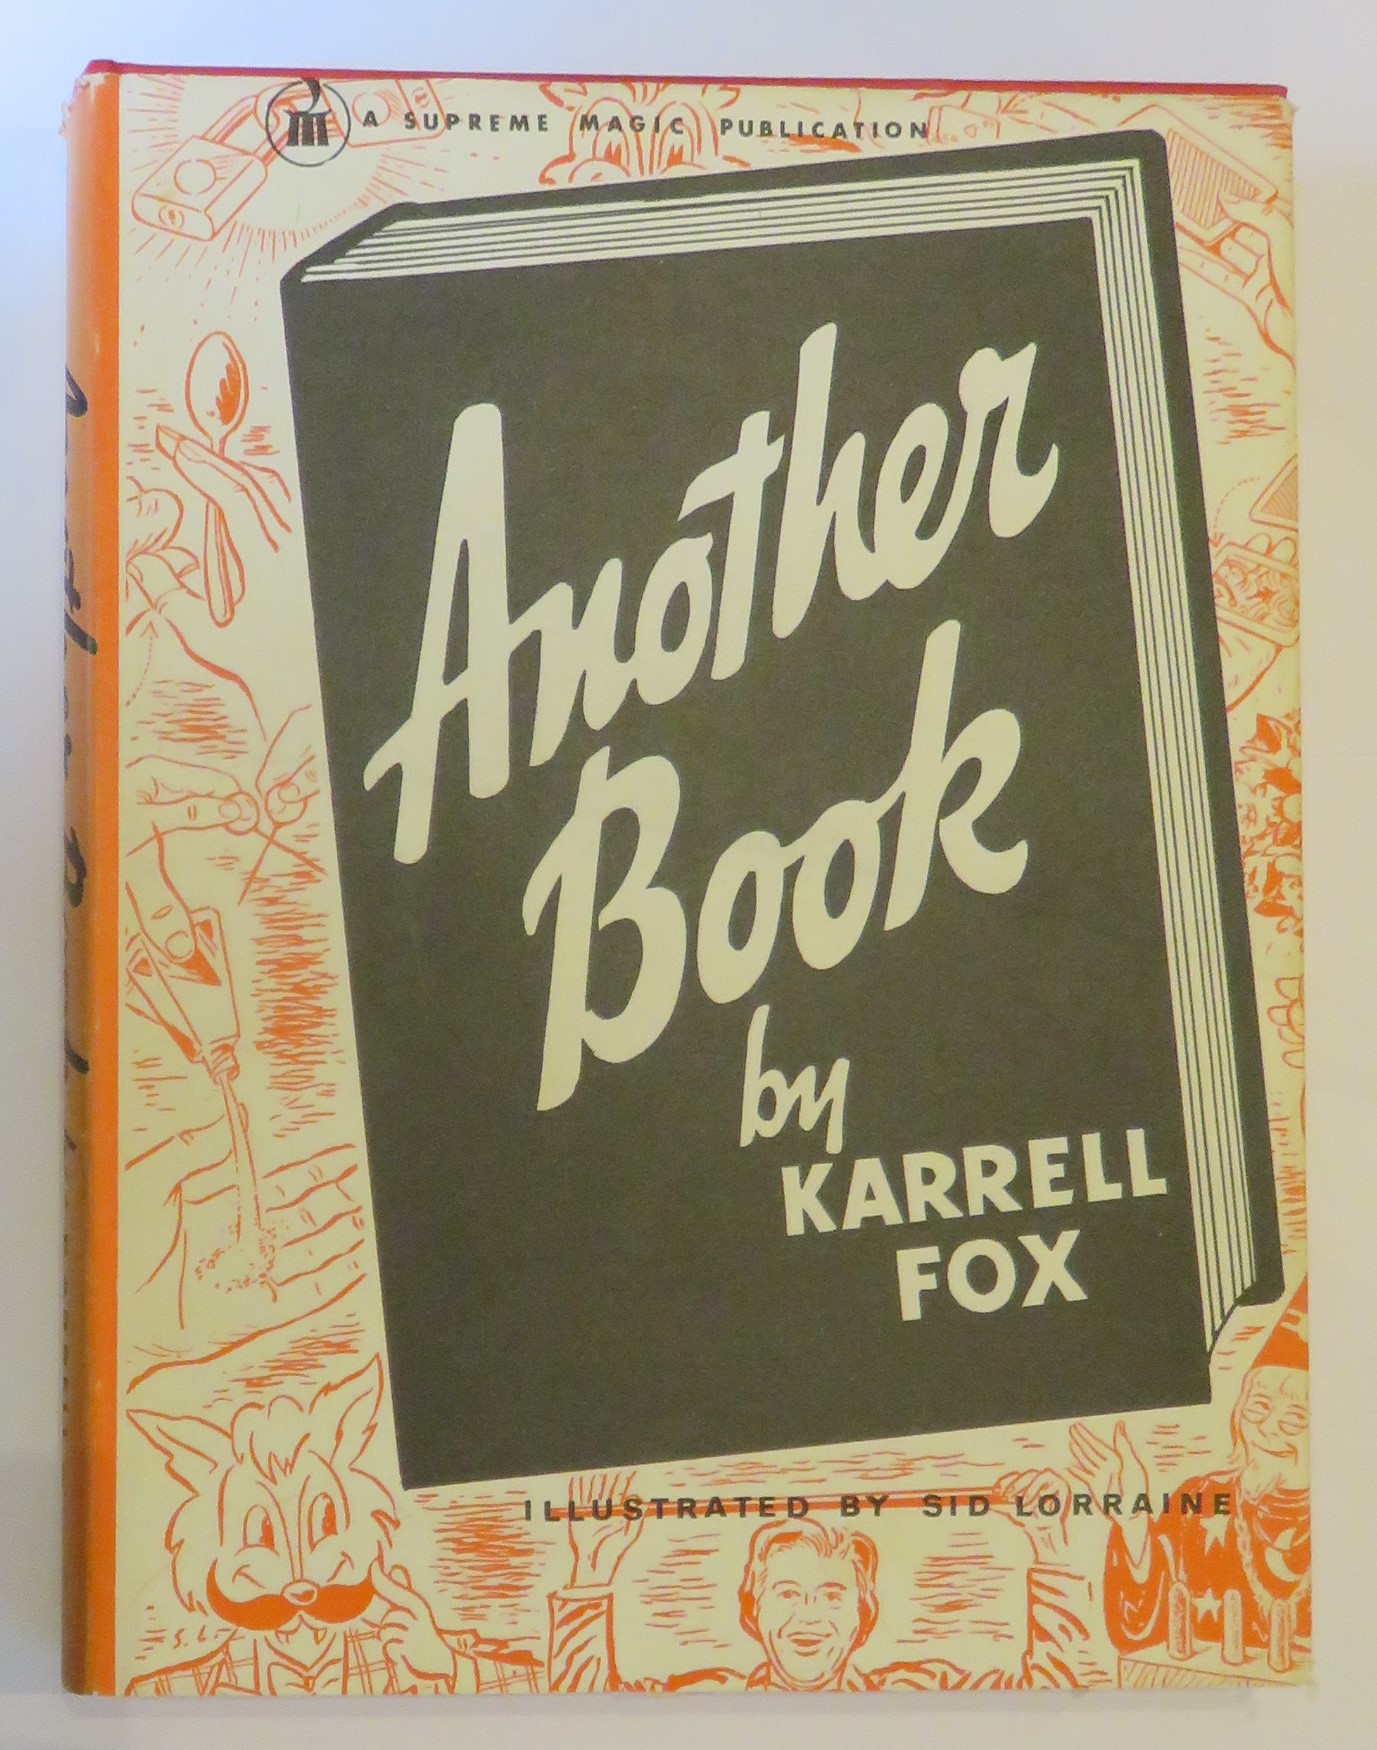 Another Book by Karrell Fox